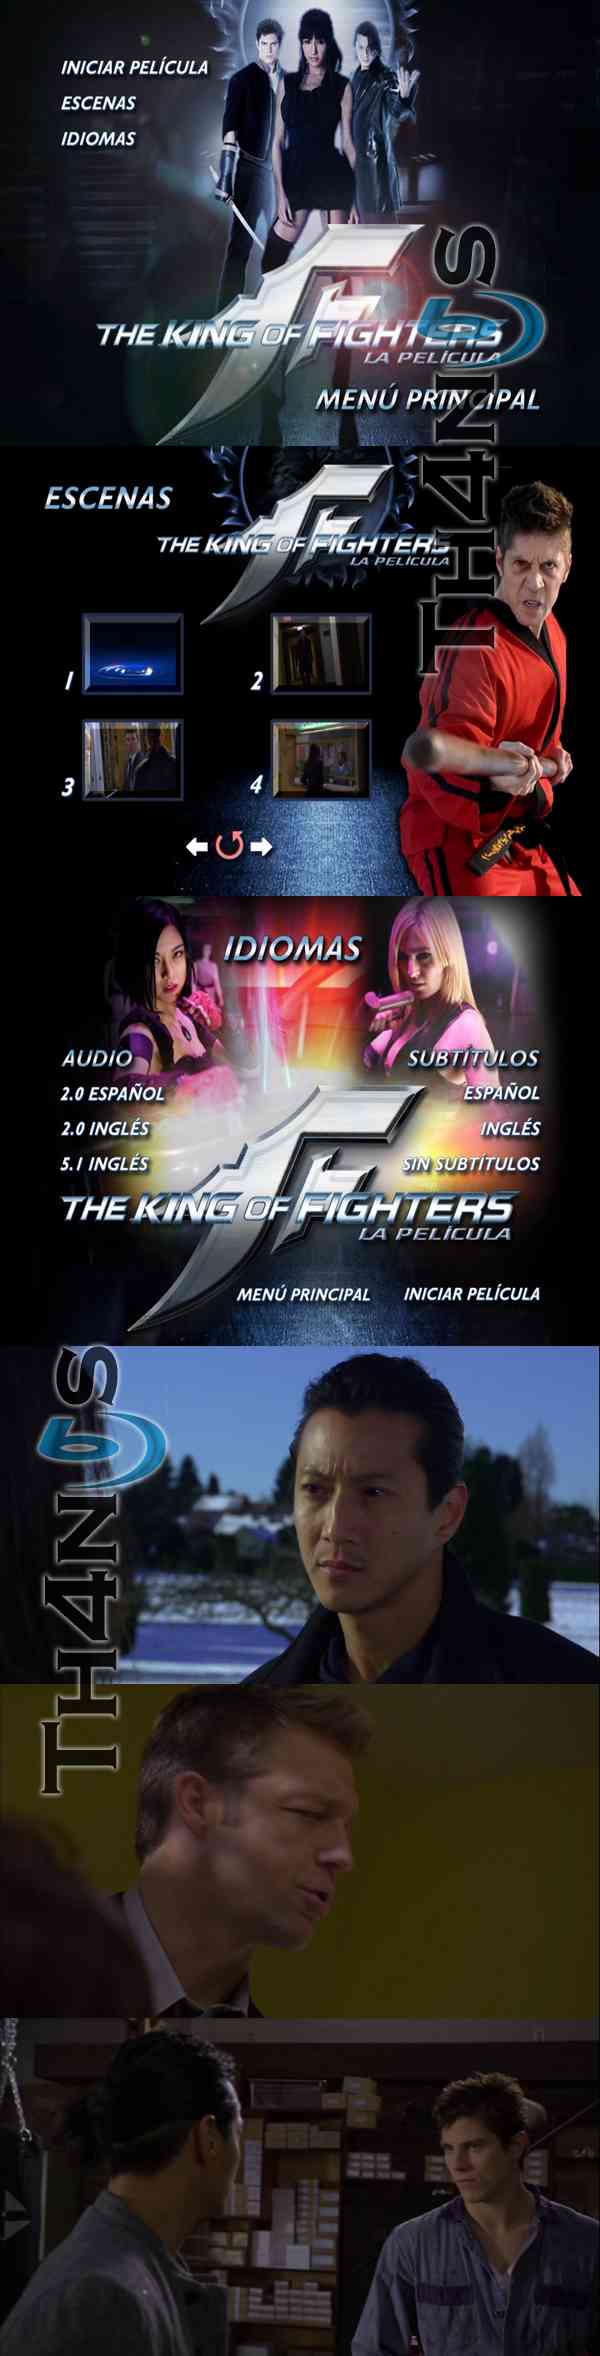 "The King of Fighters DVD Latino"